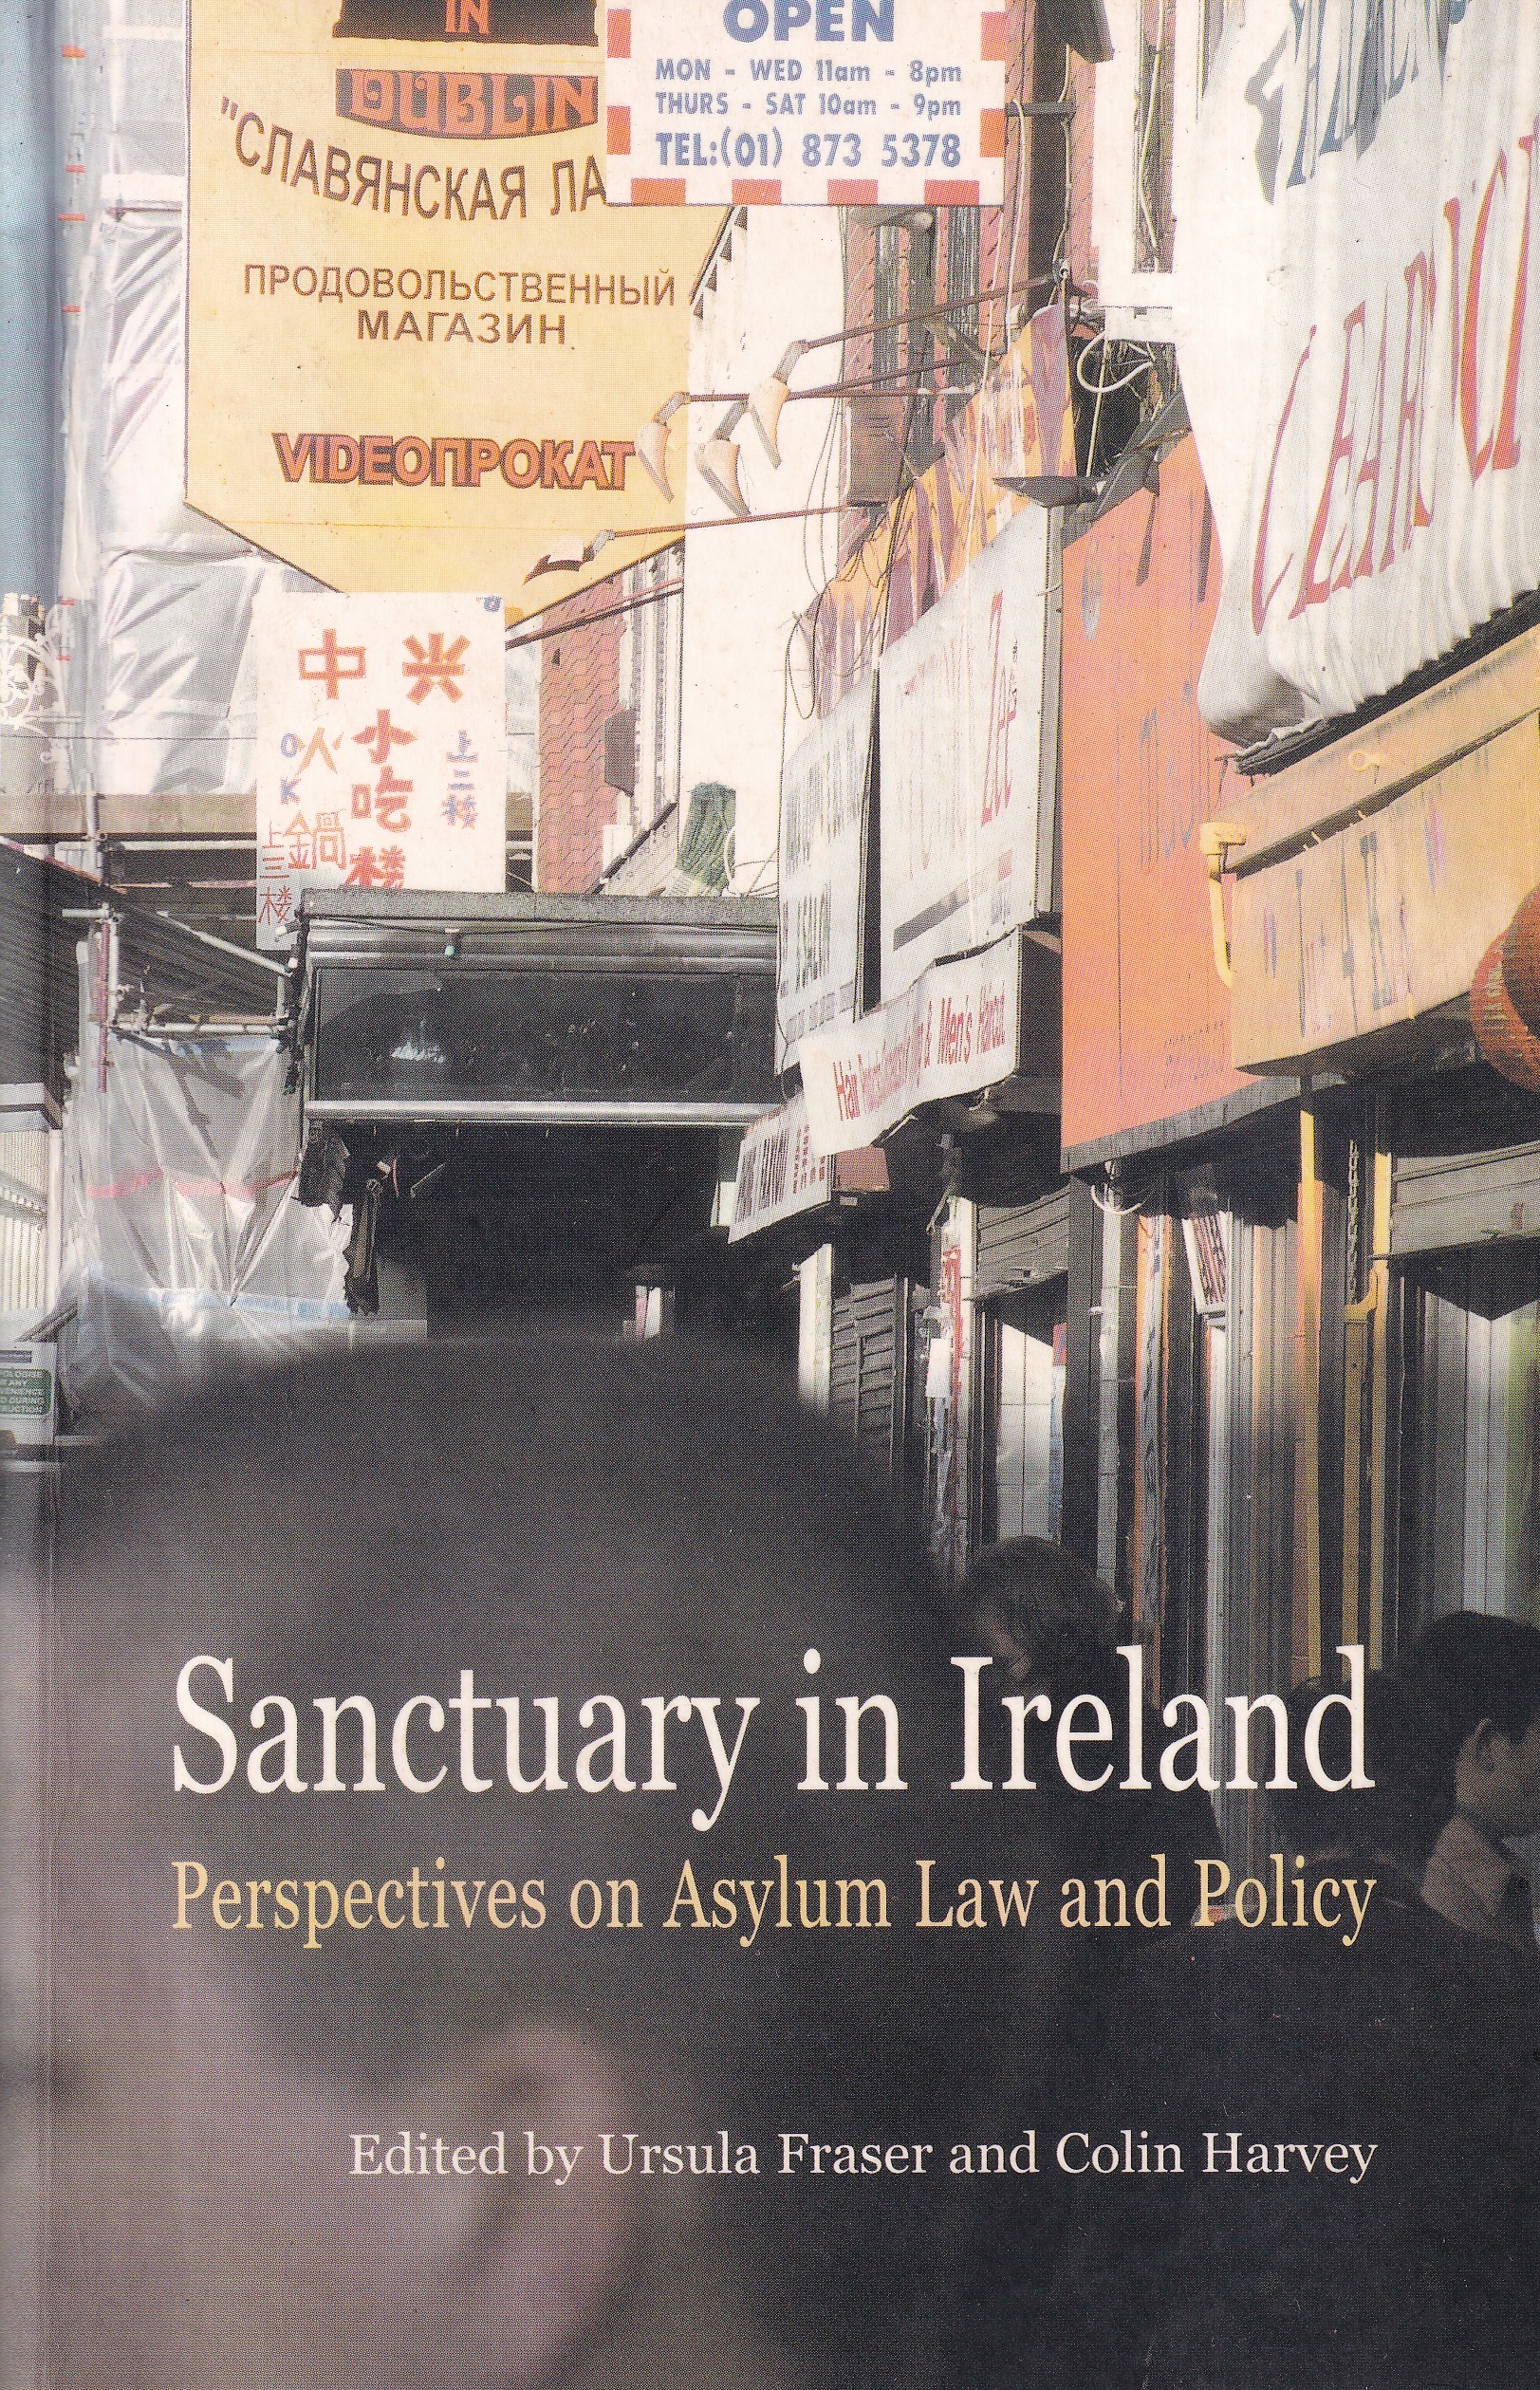 Sanctuary in Ireland: Perspectives on Asylum Law and Policy by Ursula Fraser and Colin Harvey